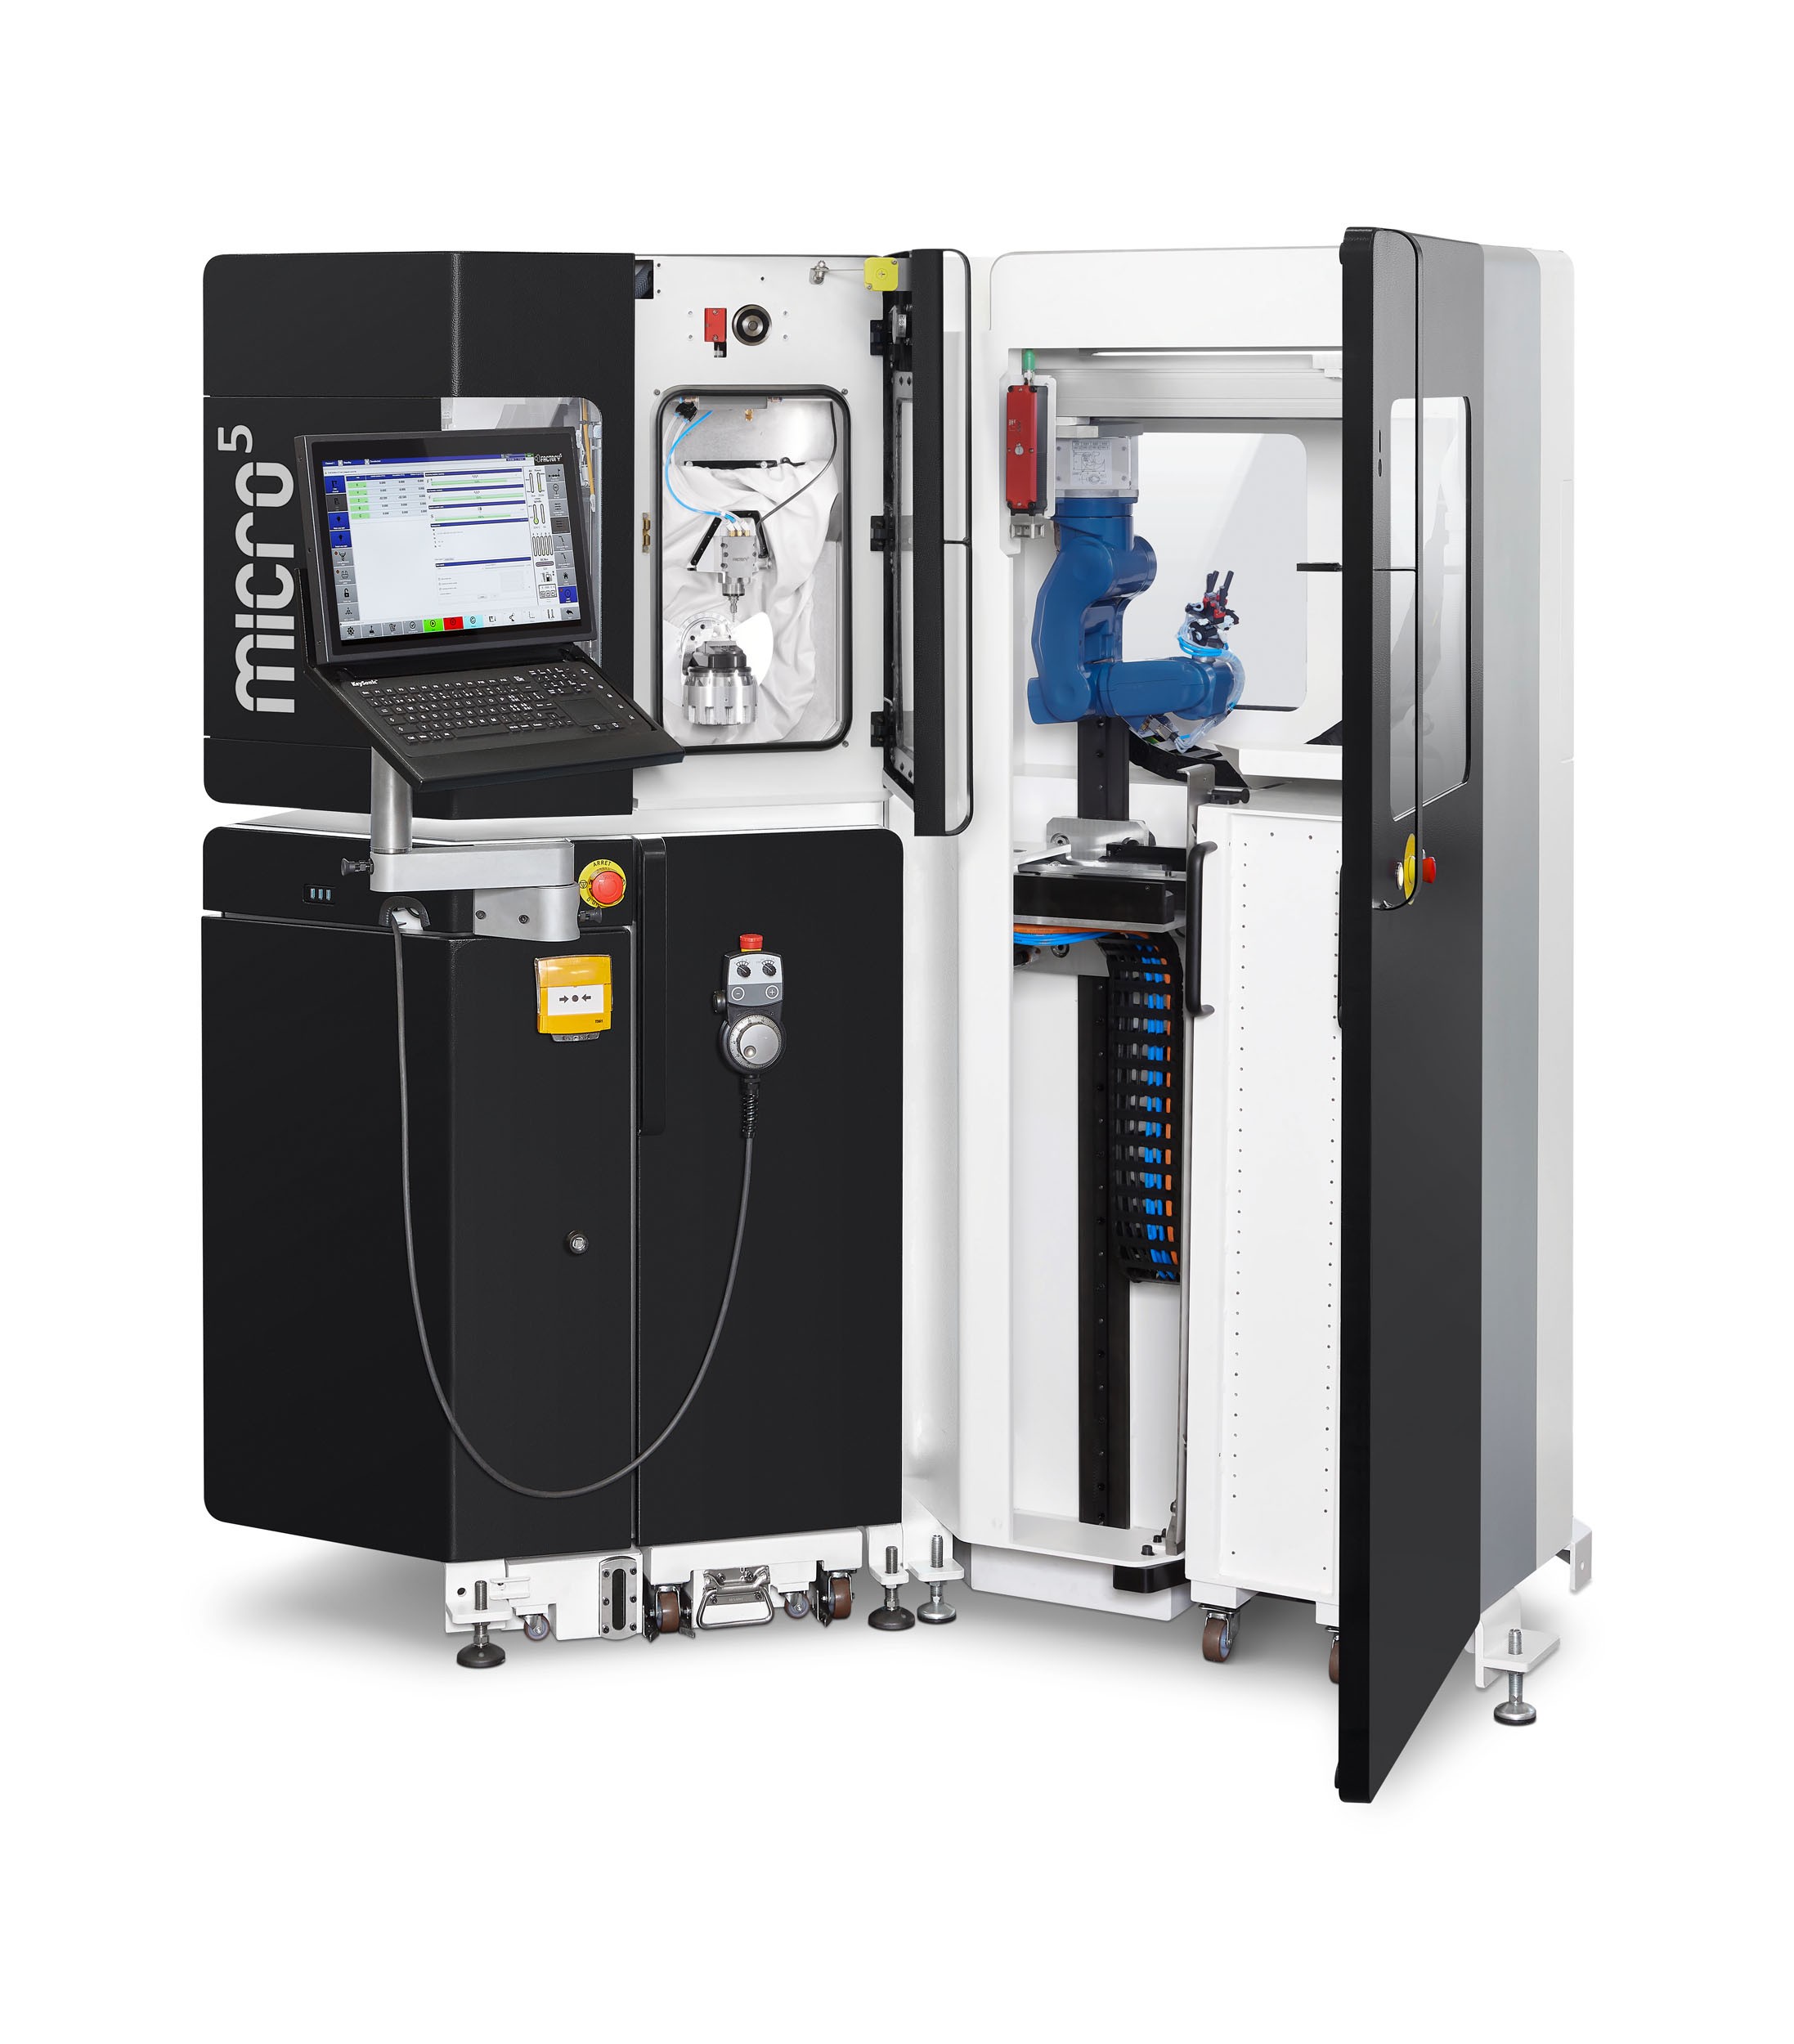 Smart combination of a Micro5 high-speed machining center and Feed5 automation.